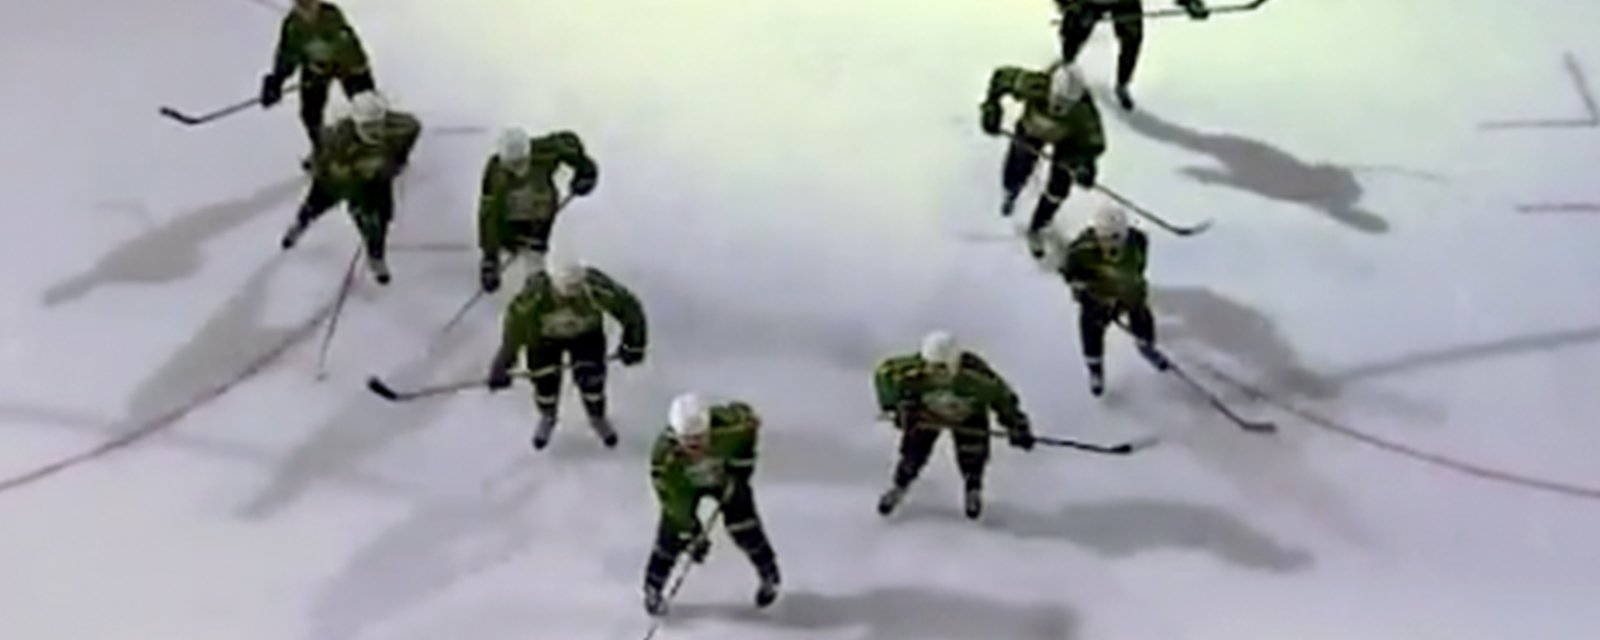 Mighty Ducks cast reunite and recreate “The Flying V” prior to Ducks/Canucks game